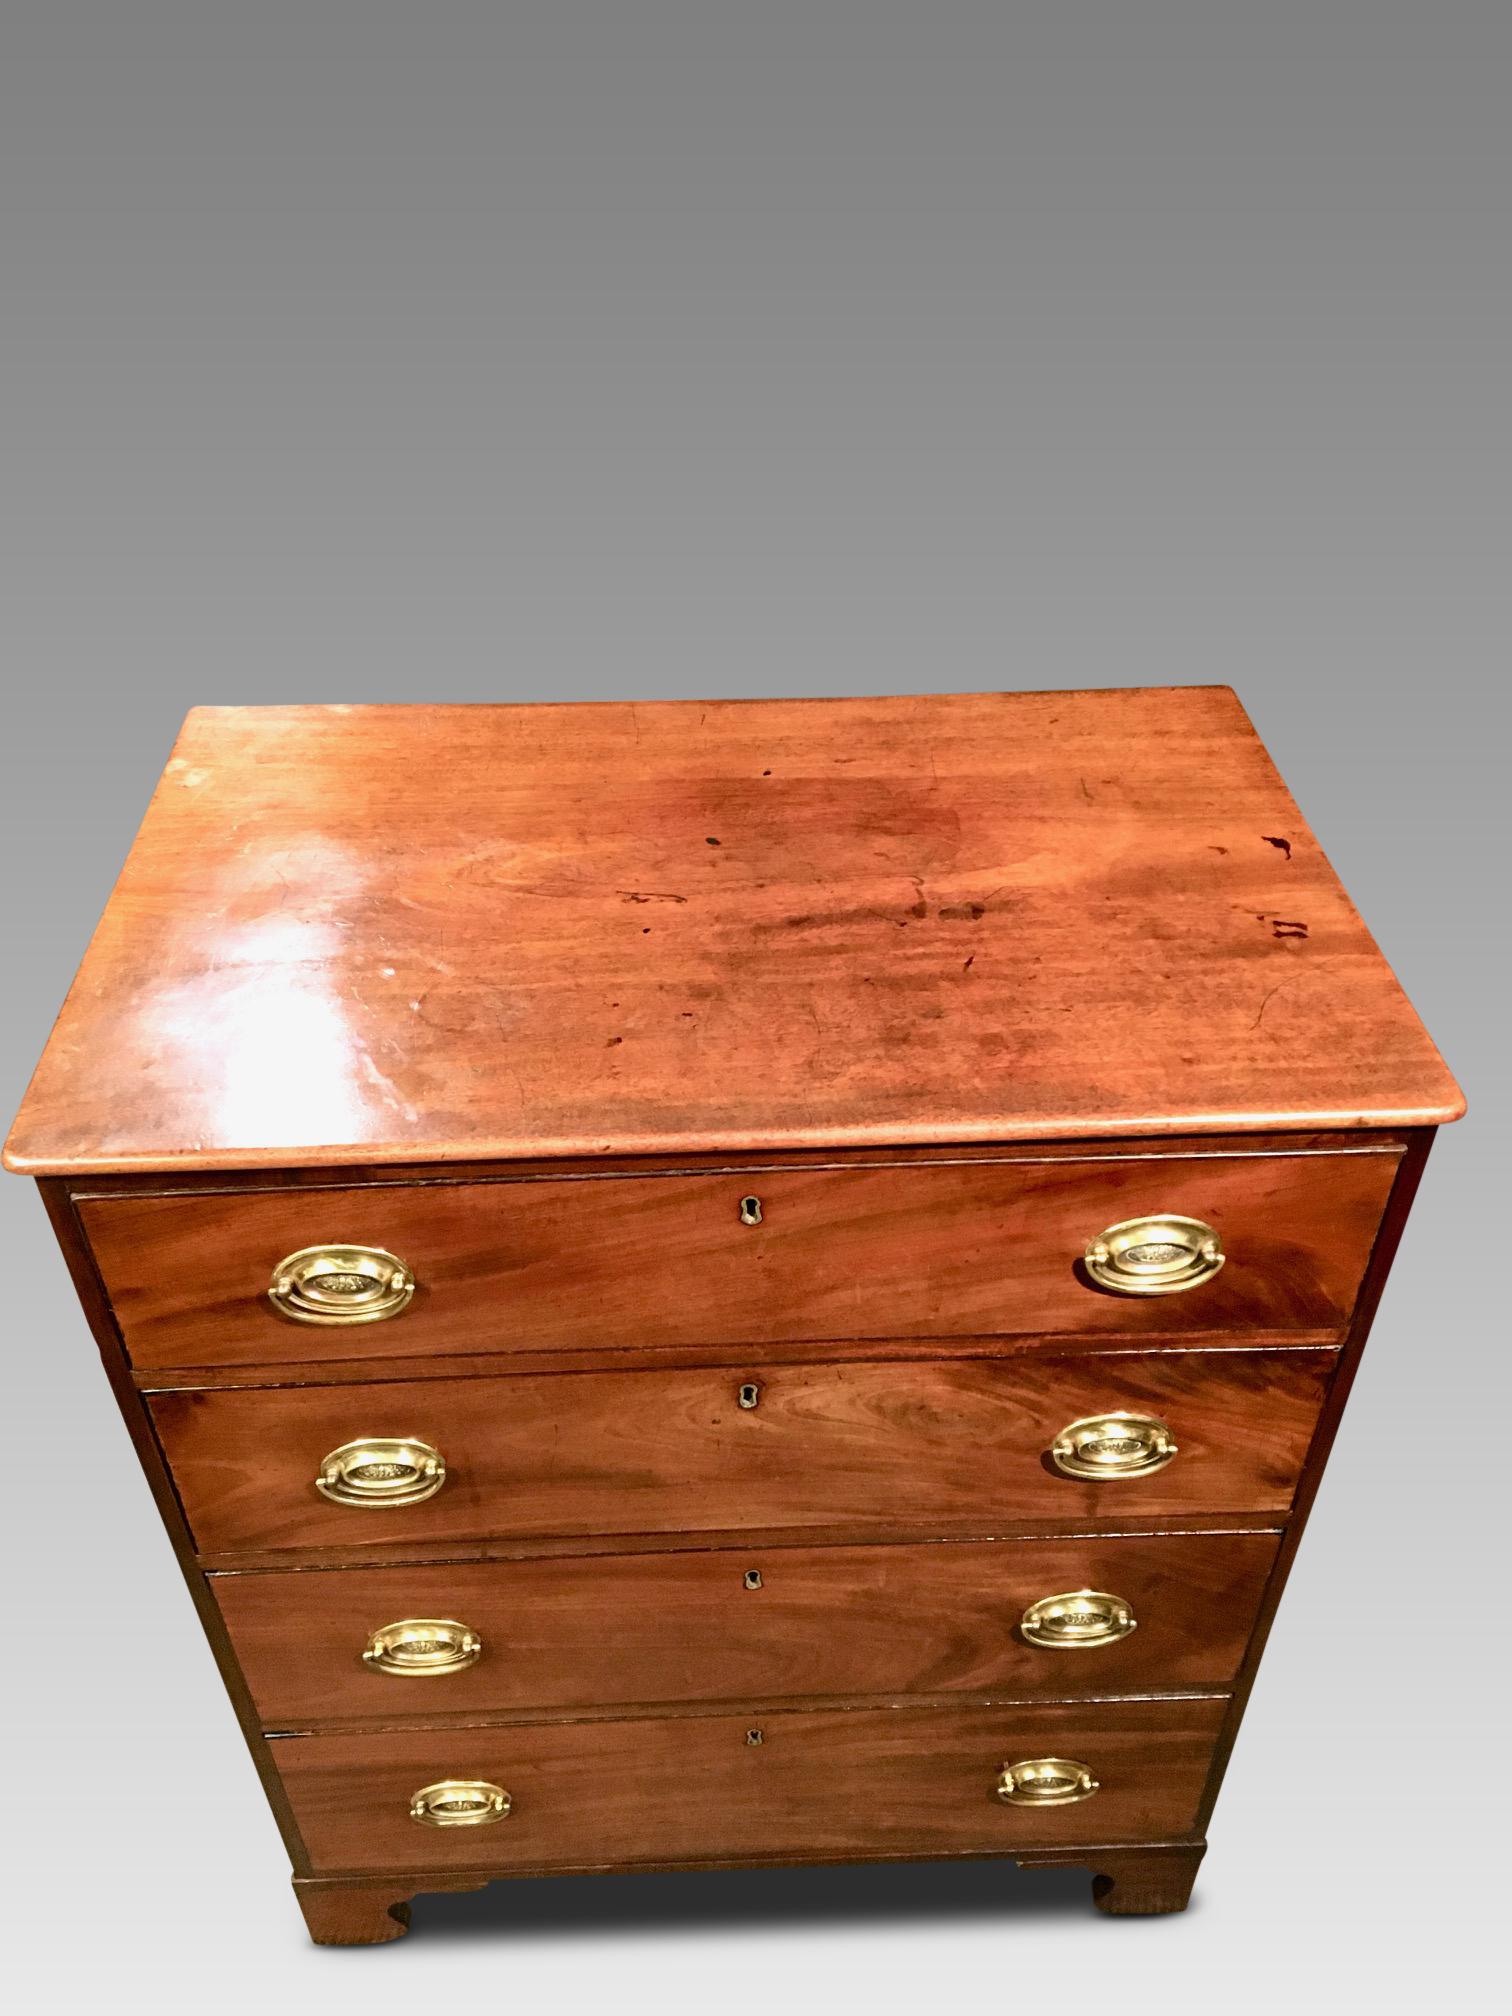 Attractive early 19th century English chest of drawers of small size, circa 1830.
This delightful chest has been well cared for by former owners. There are 4 smoothly
running drawers with oval period handles and a fine ebony beading around the